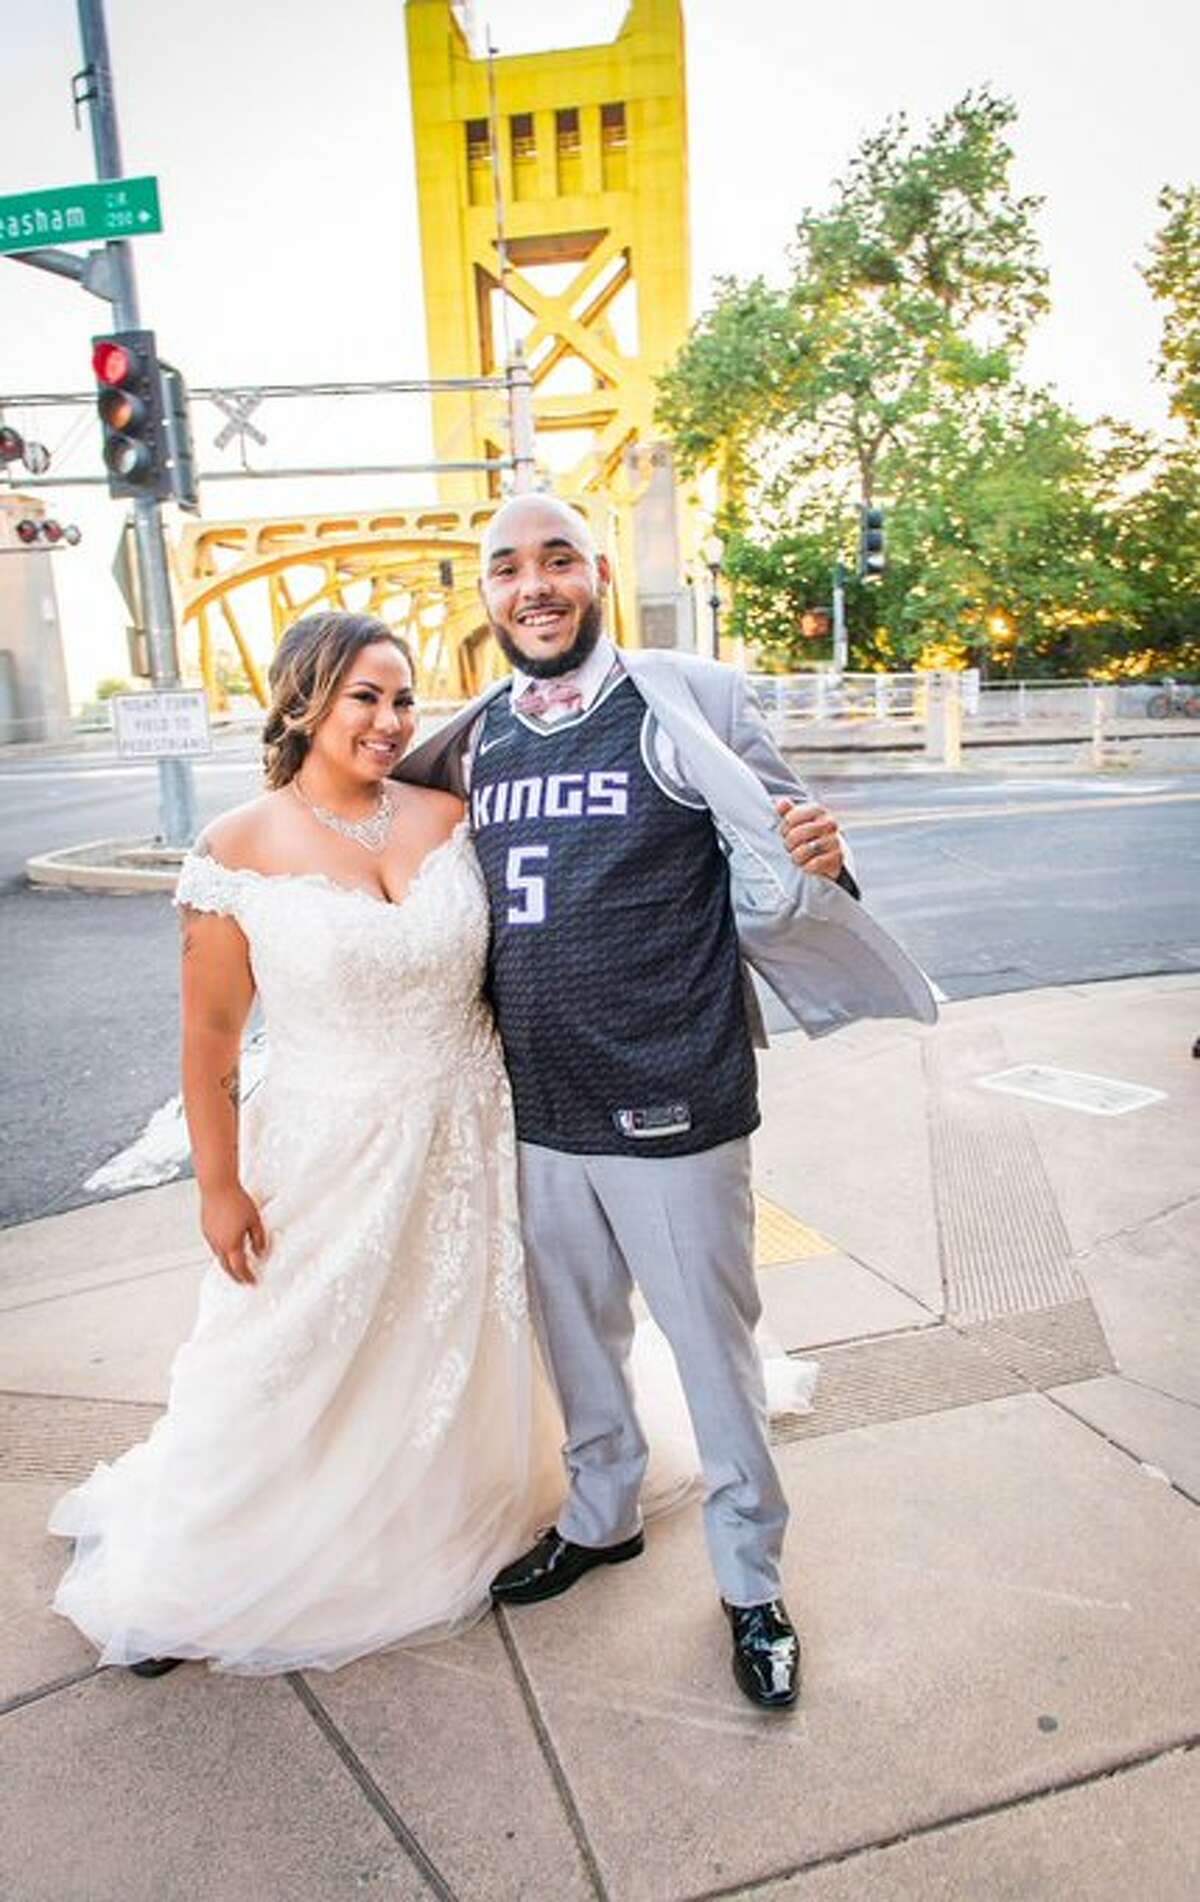 Anthony Carmichael shows off his Sacramento Kings jersey in this wedding photo with his wife Lanissa Carmichael.